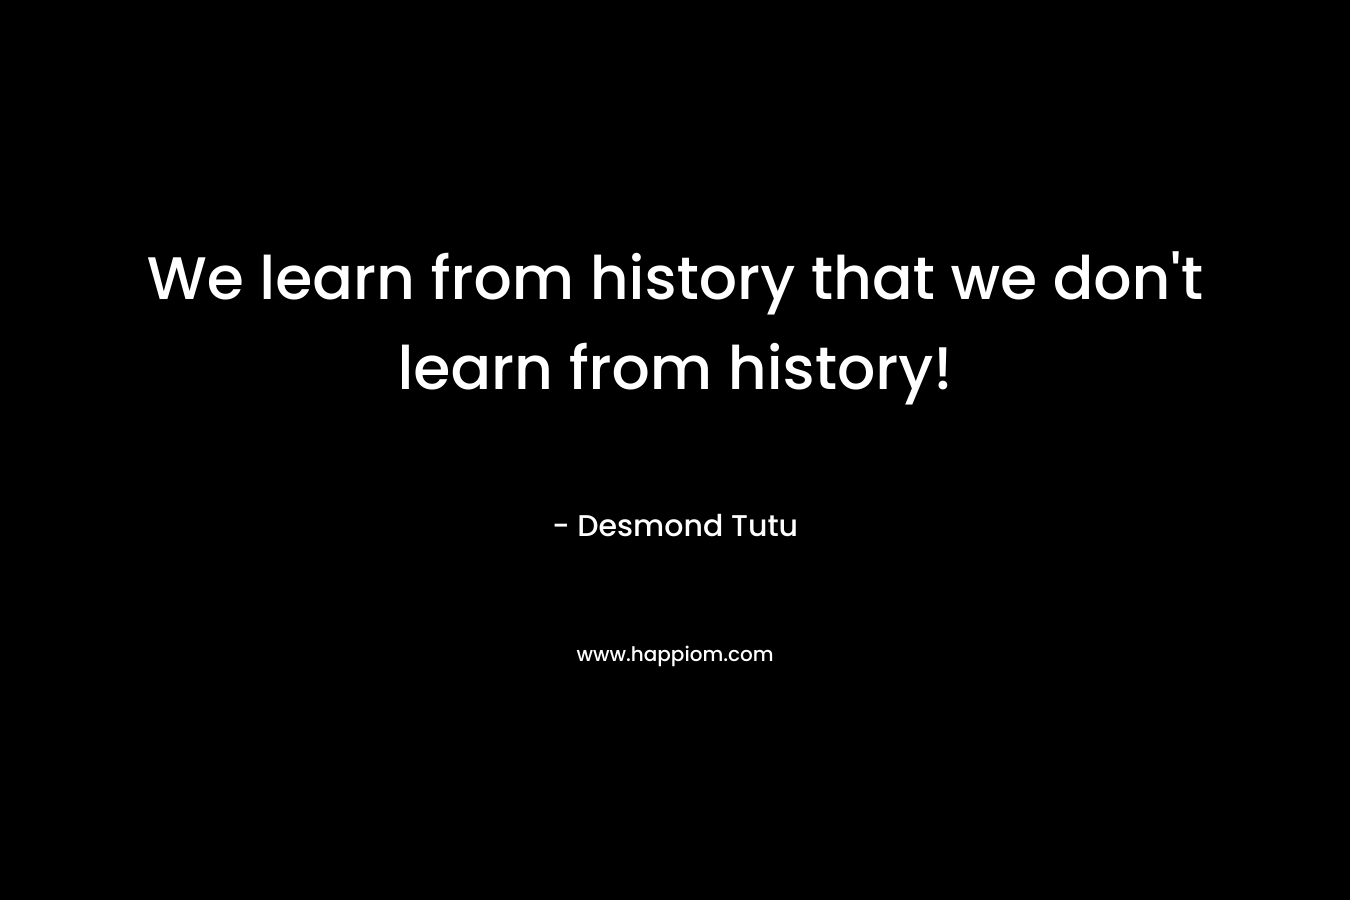 We learn from history that we don’t learn from history! – Desmond Tutu